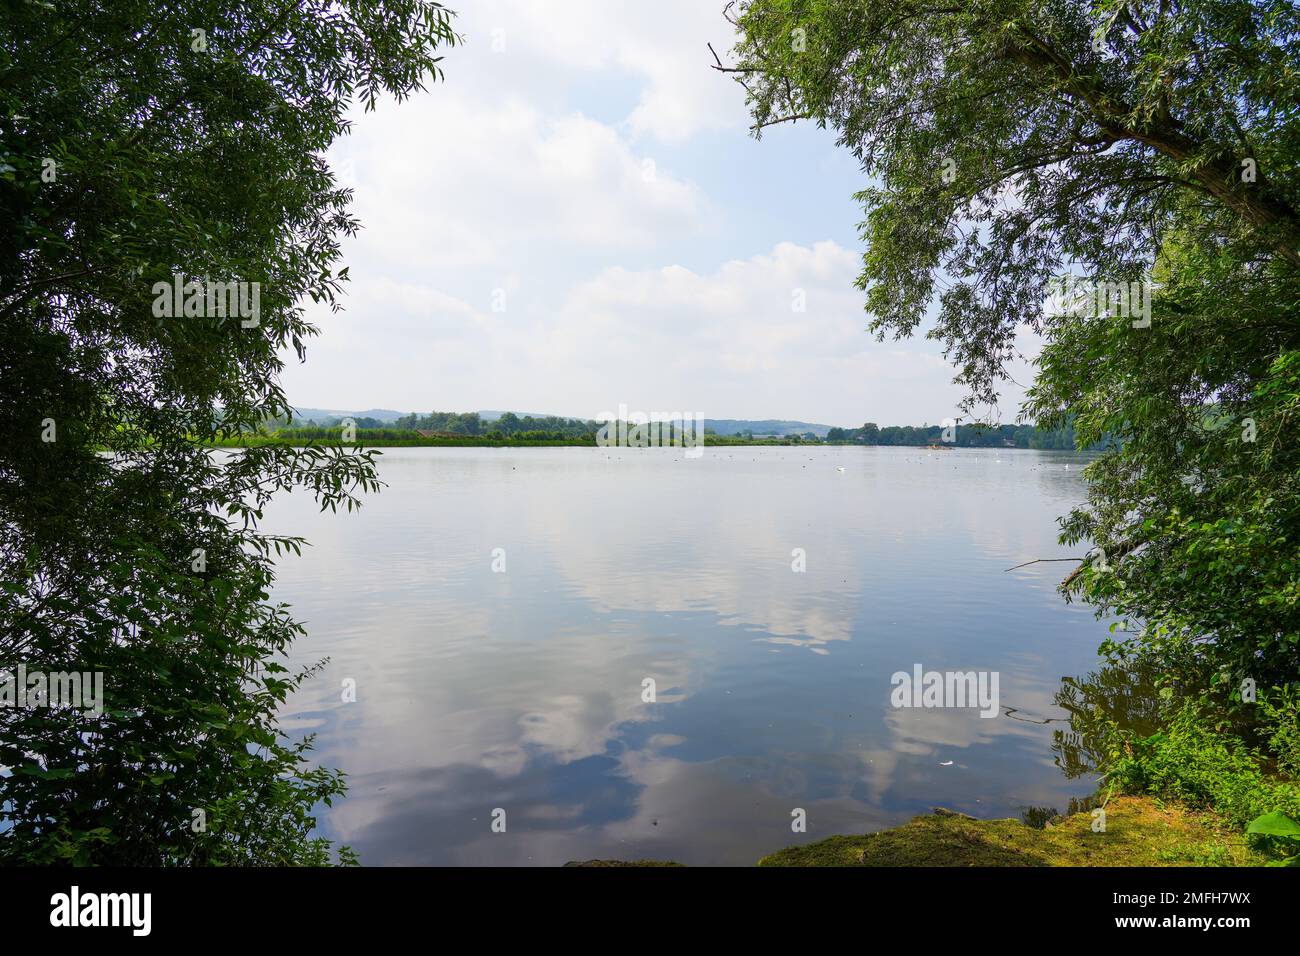 Hengsen reservoir in the Bahnwald nature reserve near Holzwickede. Ruhr reservoir in the Ruhr area. Landscape with a lake and the surrounding nature. Stock Photo